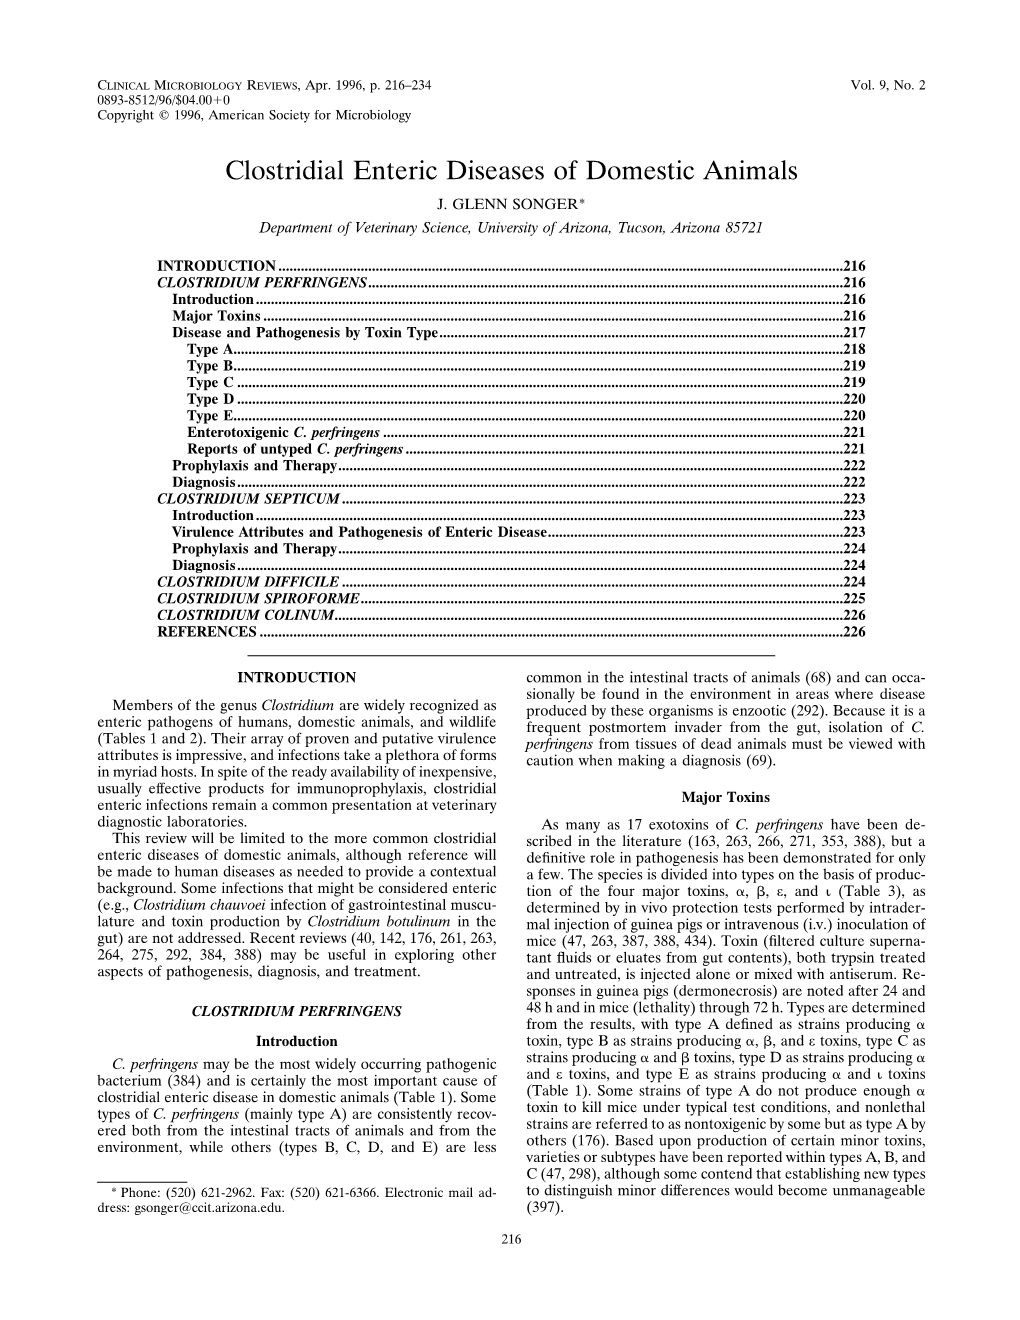 Clostridial Enteric Diseases of Domestic Animals J